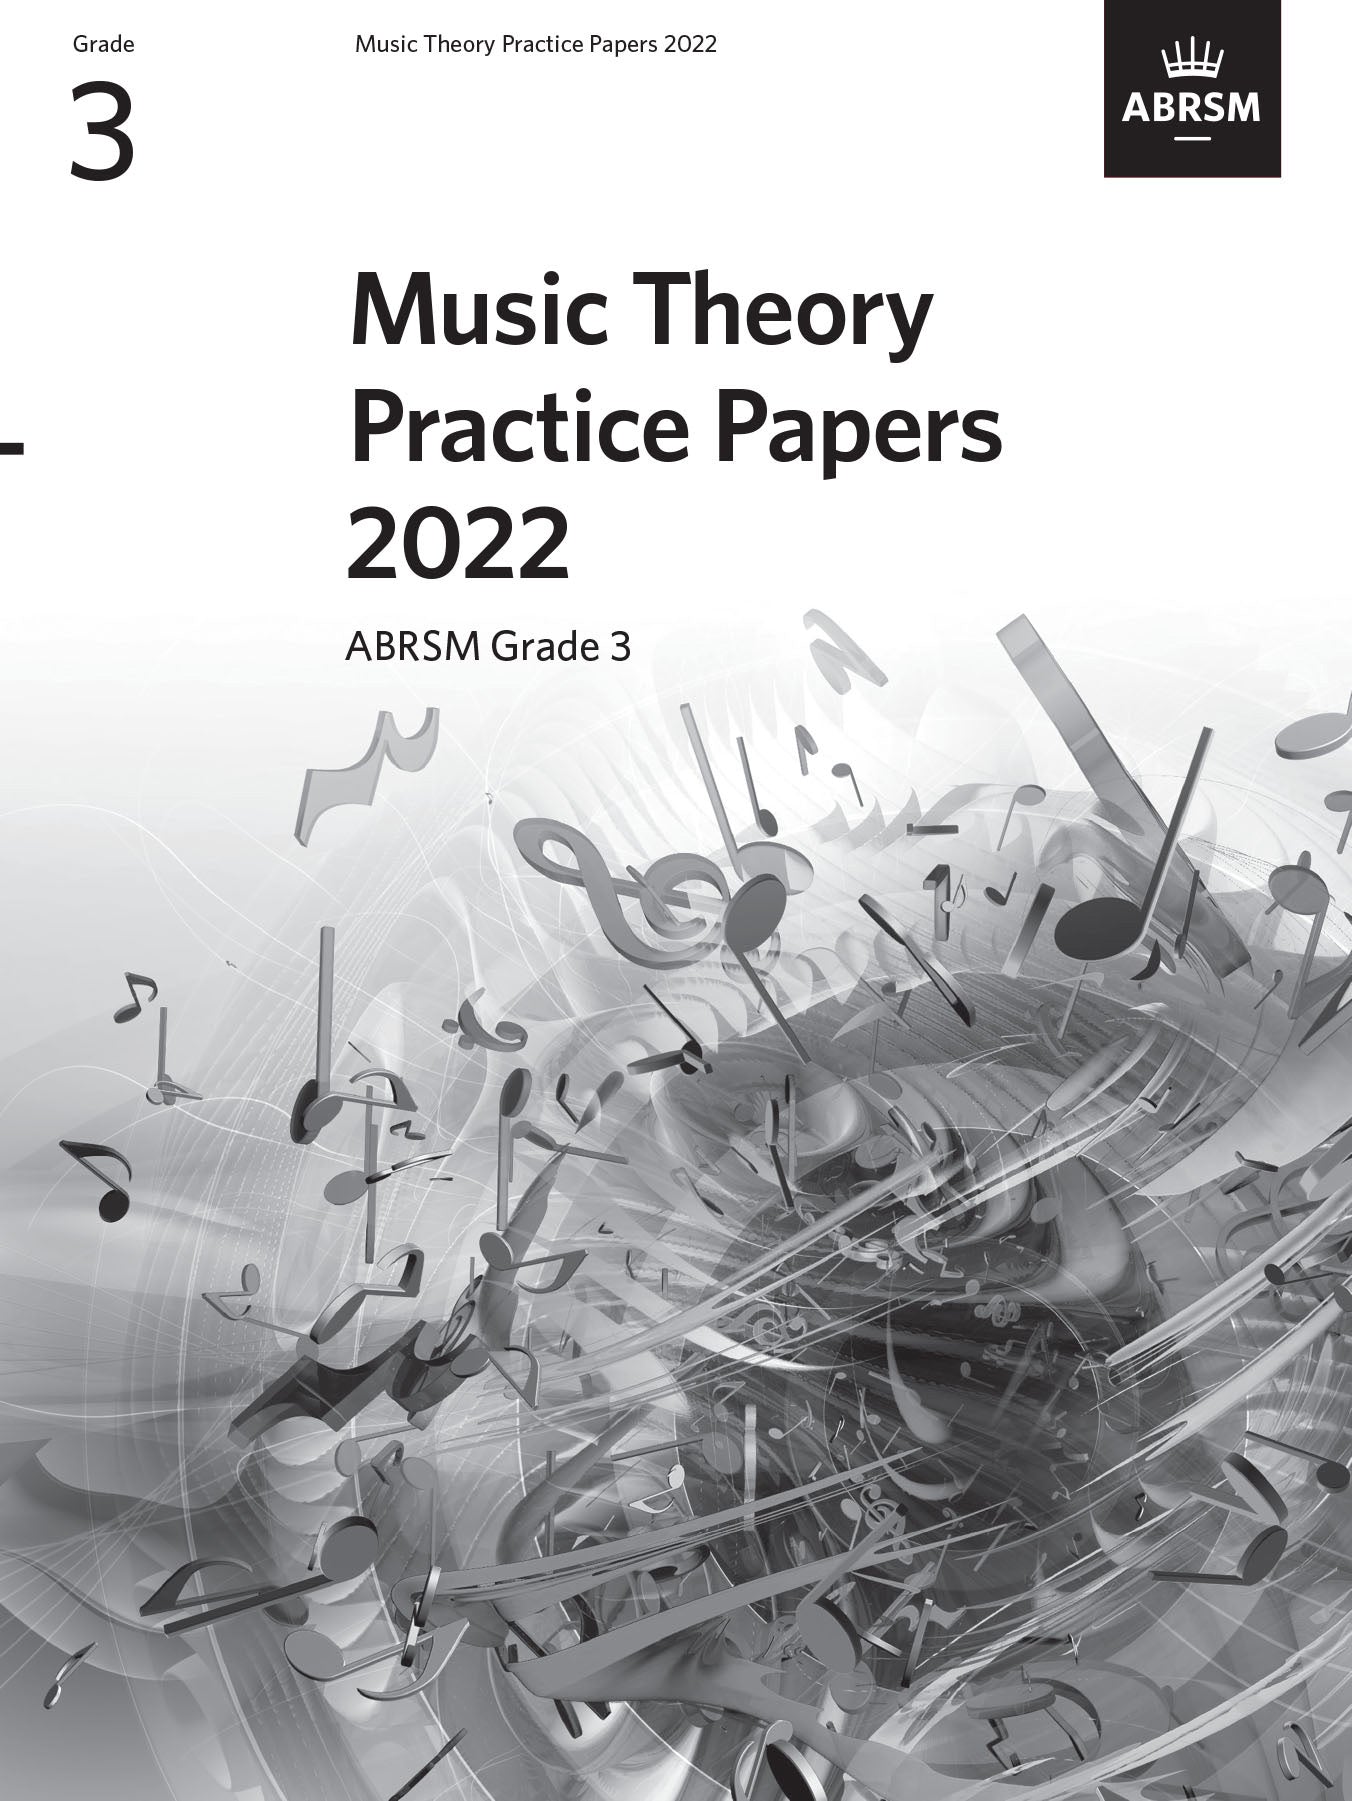 ABRSM Music Theory Practice Papers 2022 Grade 3